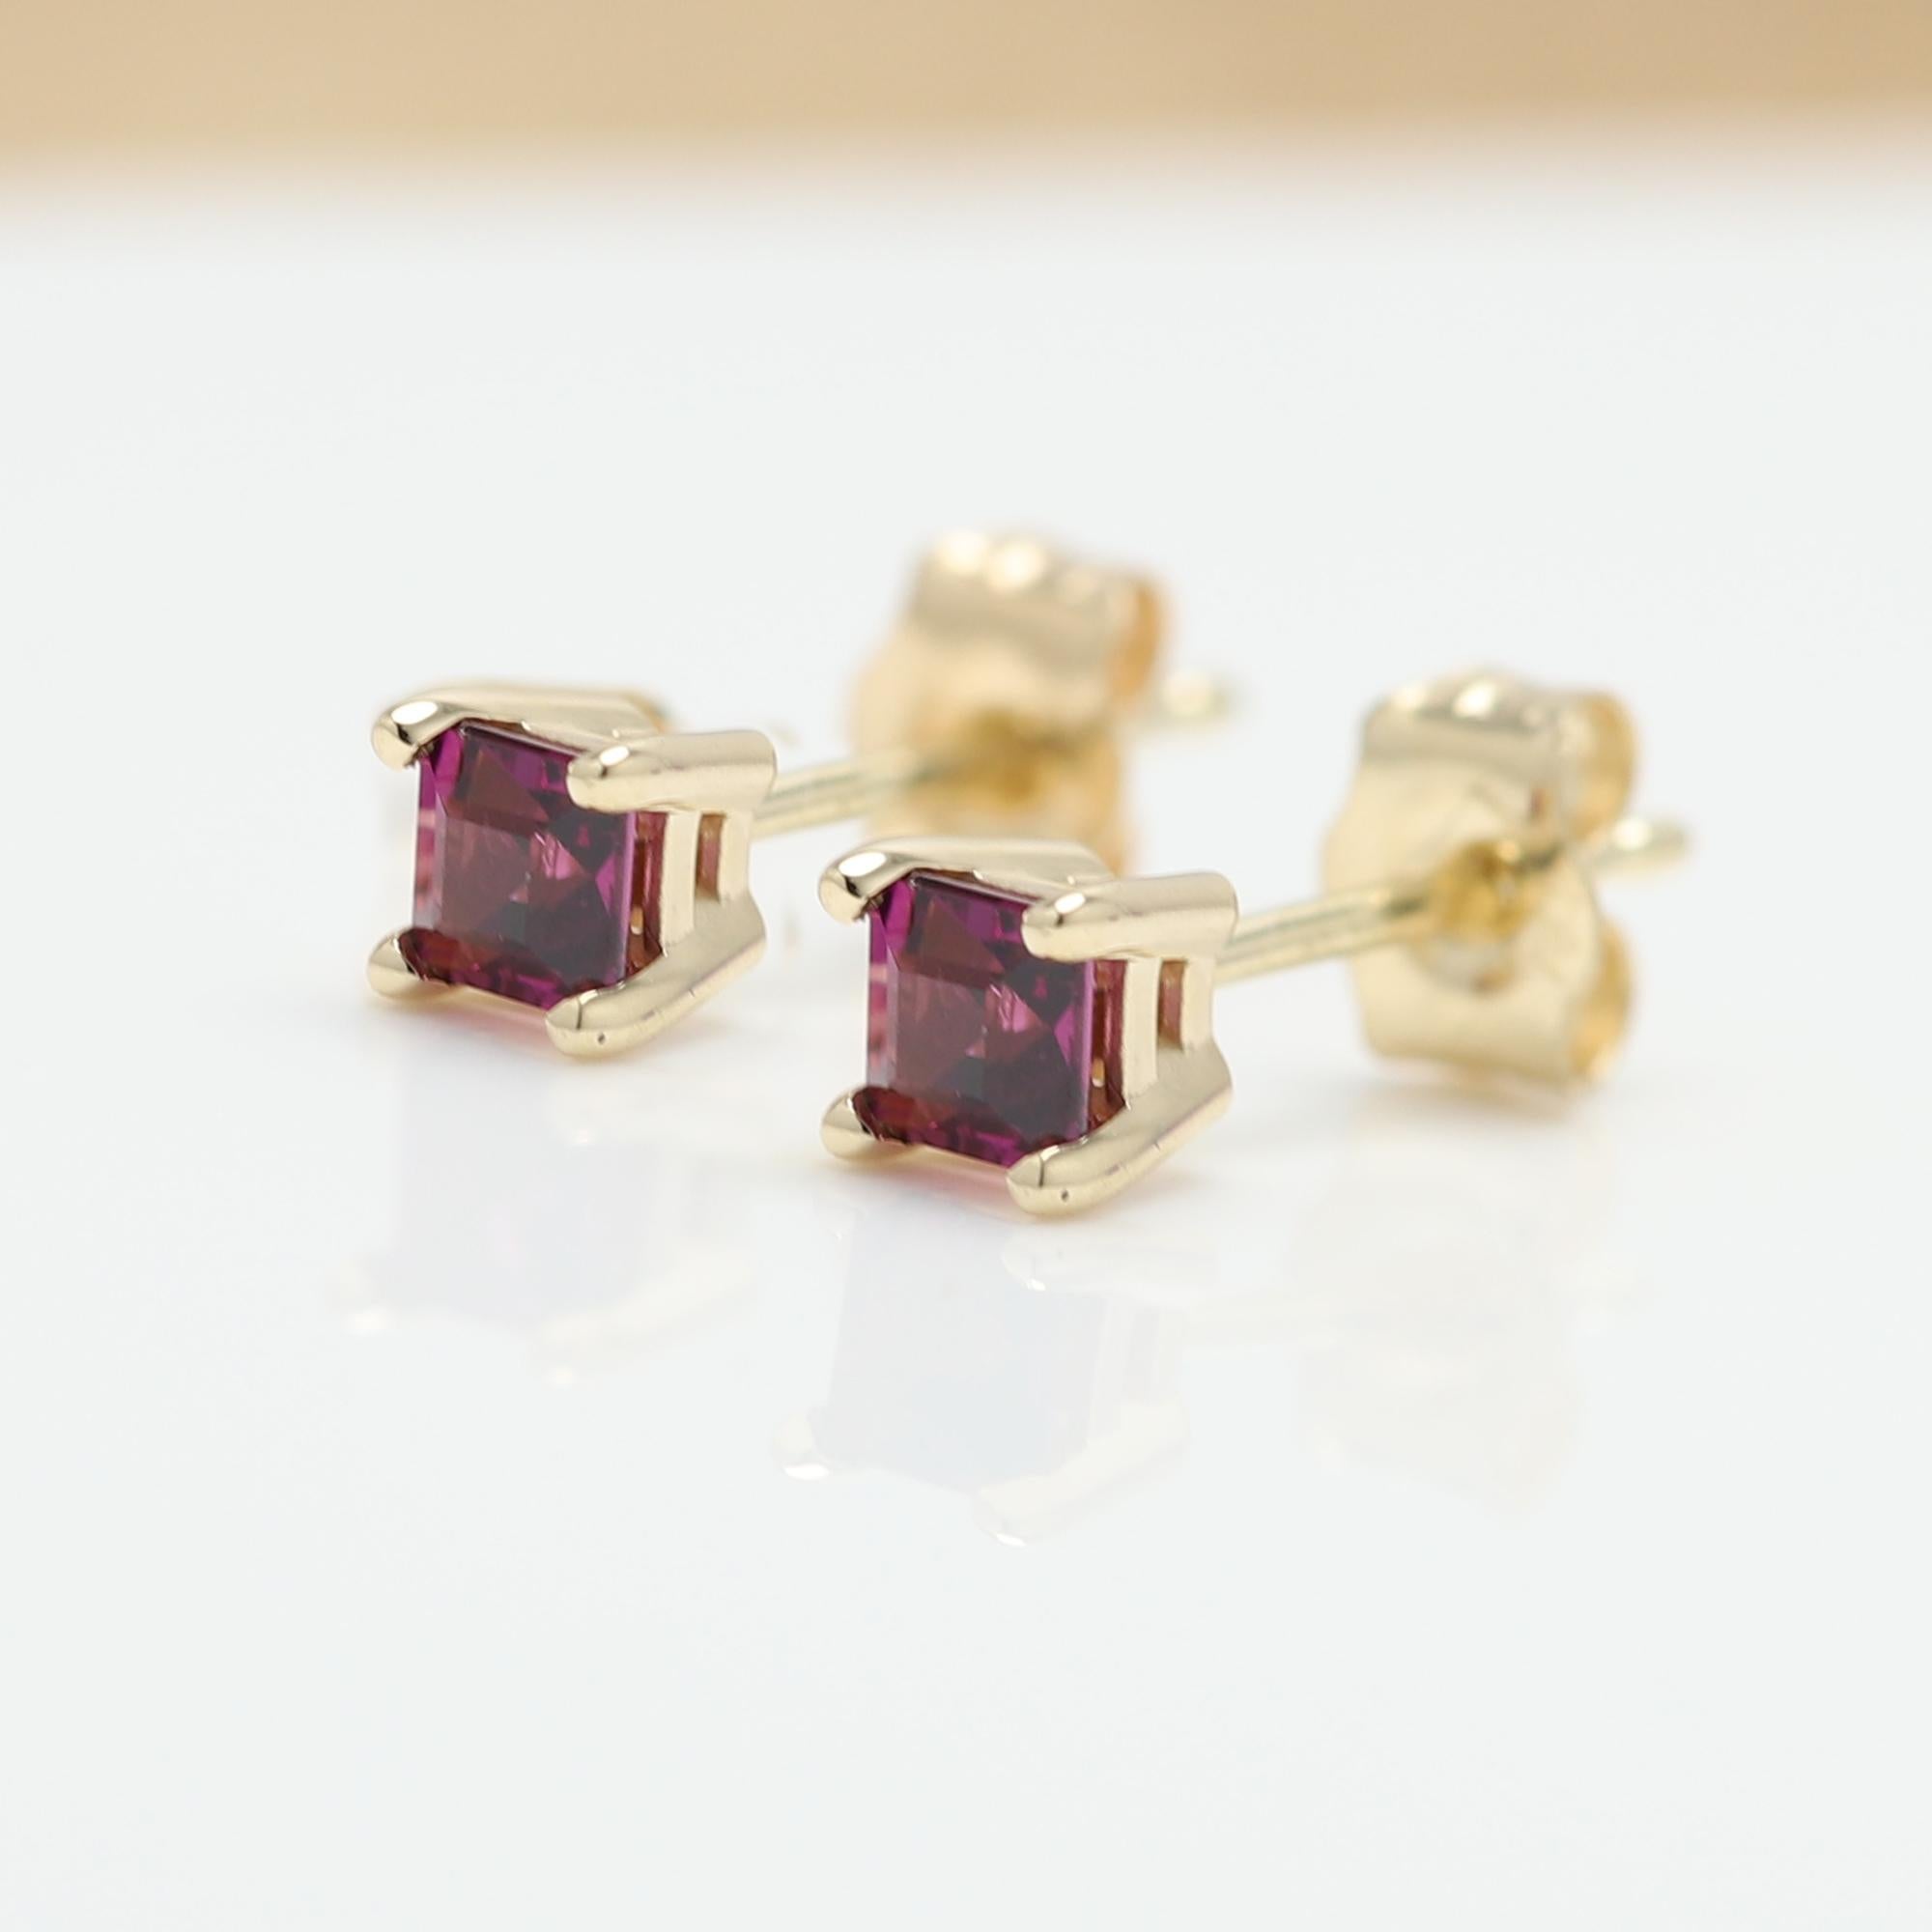 Square Cut Rhodolite Earring Studs Mini Cute Size 14 Karat Yellow Gold, Natural Gems For Sale